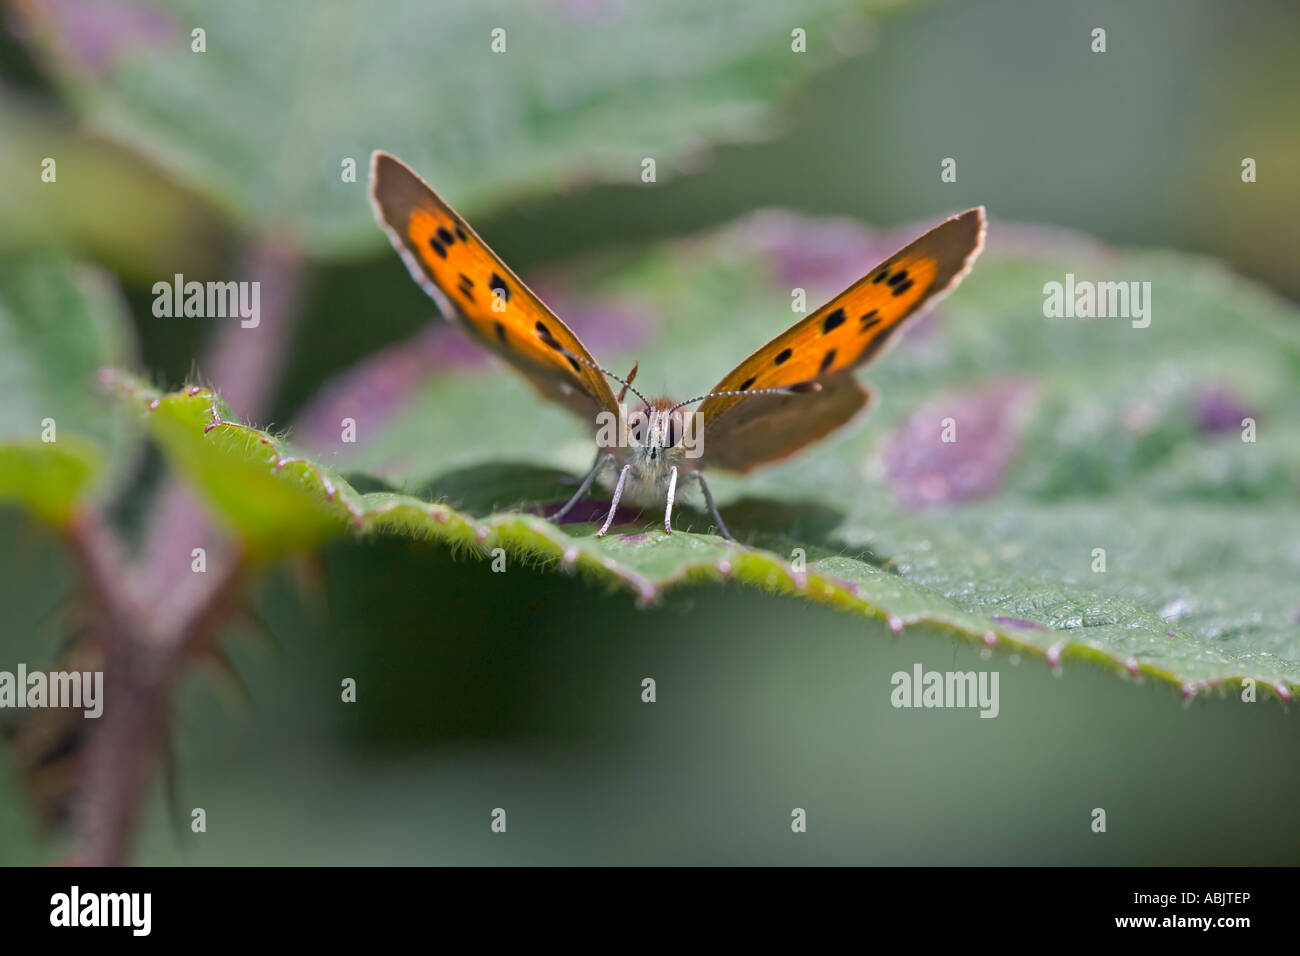 Small Copper butterfly Lycaena phlaeus Stock Photo